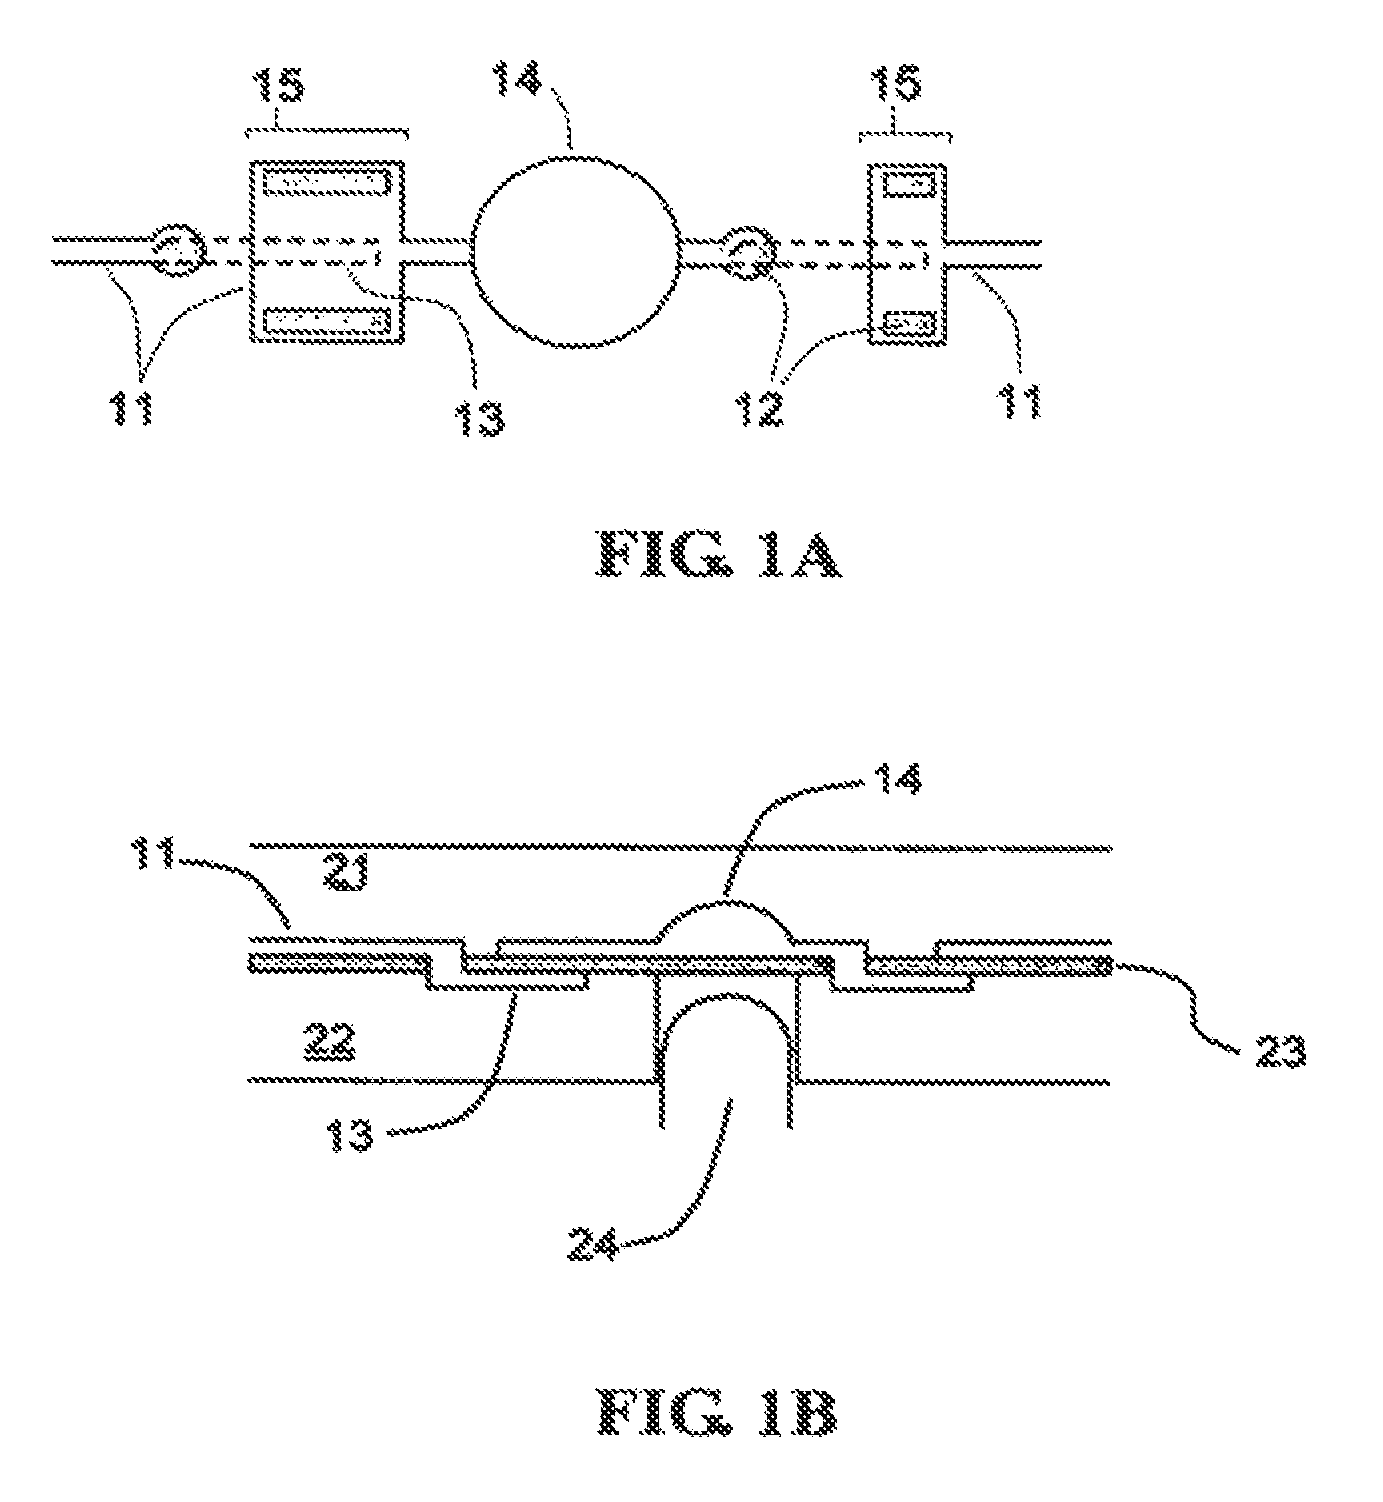 Valve structure for consistent valve operation of a miniaturized fluid delivery and analysis system